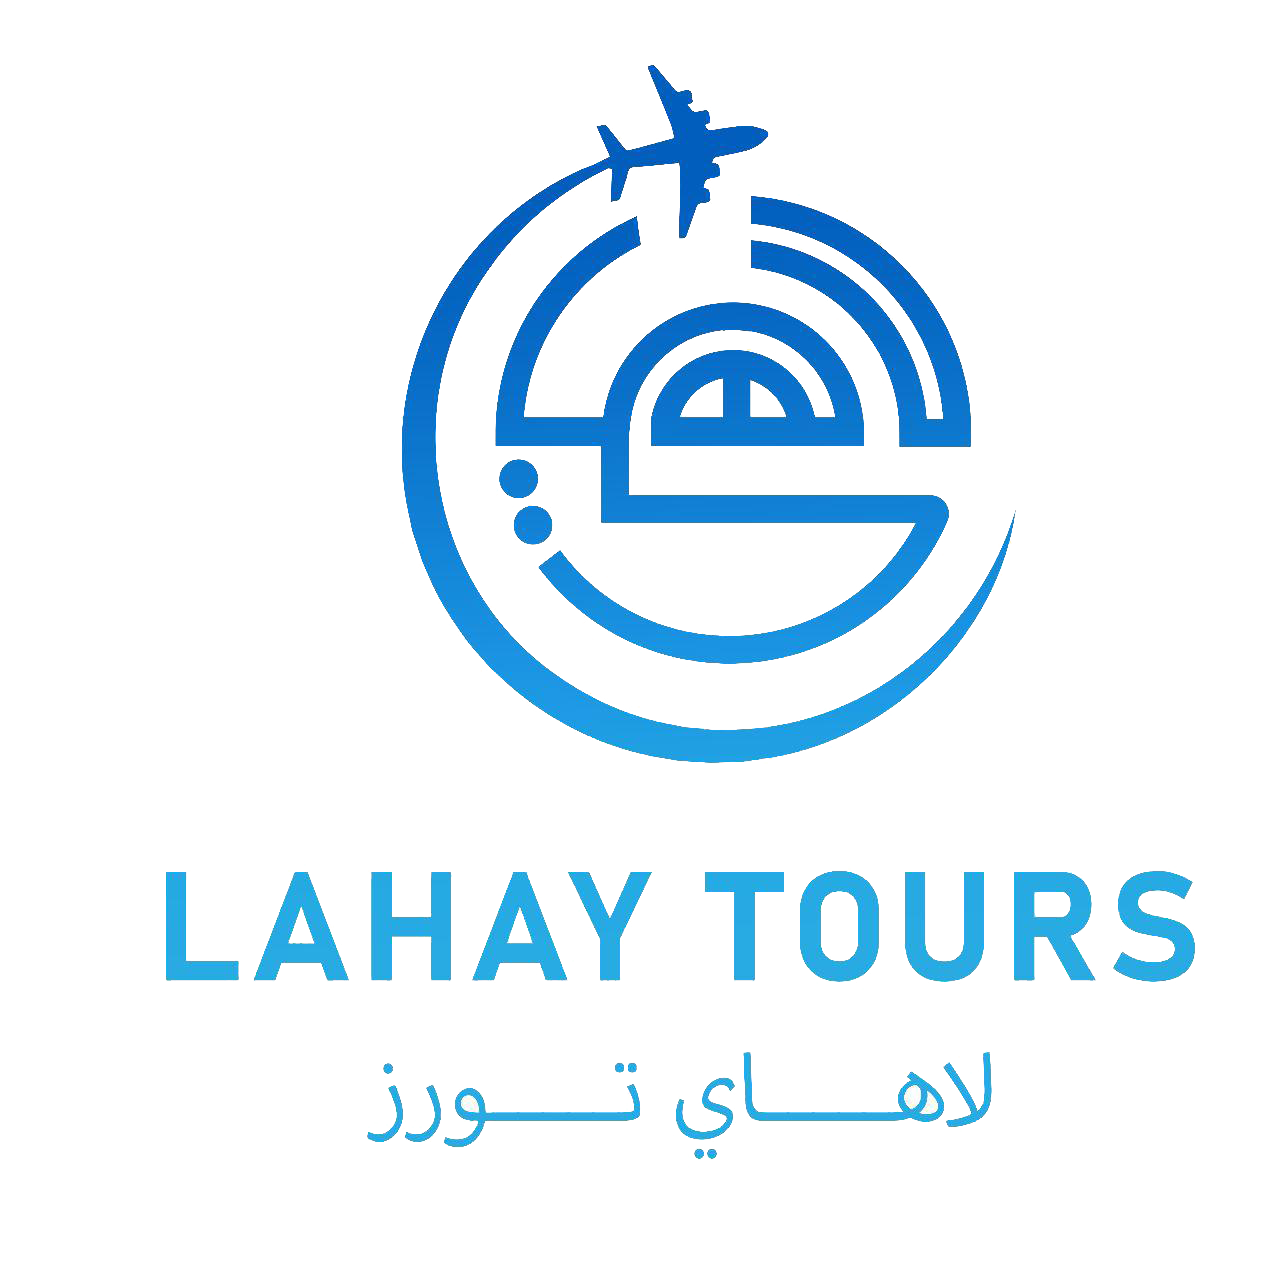  Lahay Tours